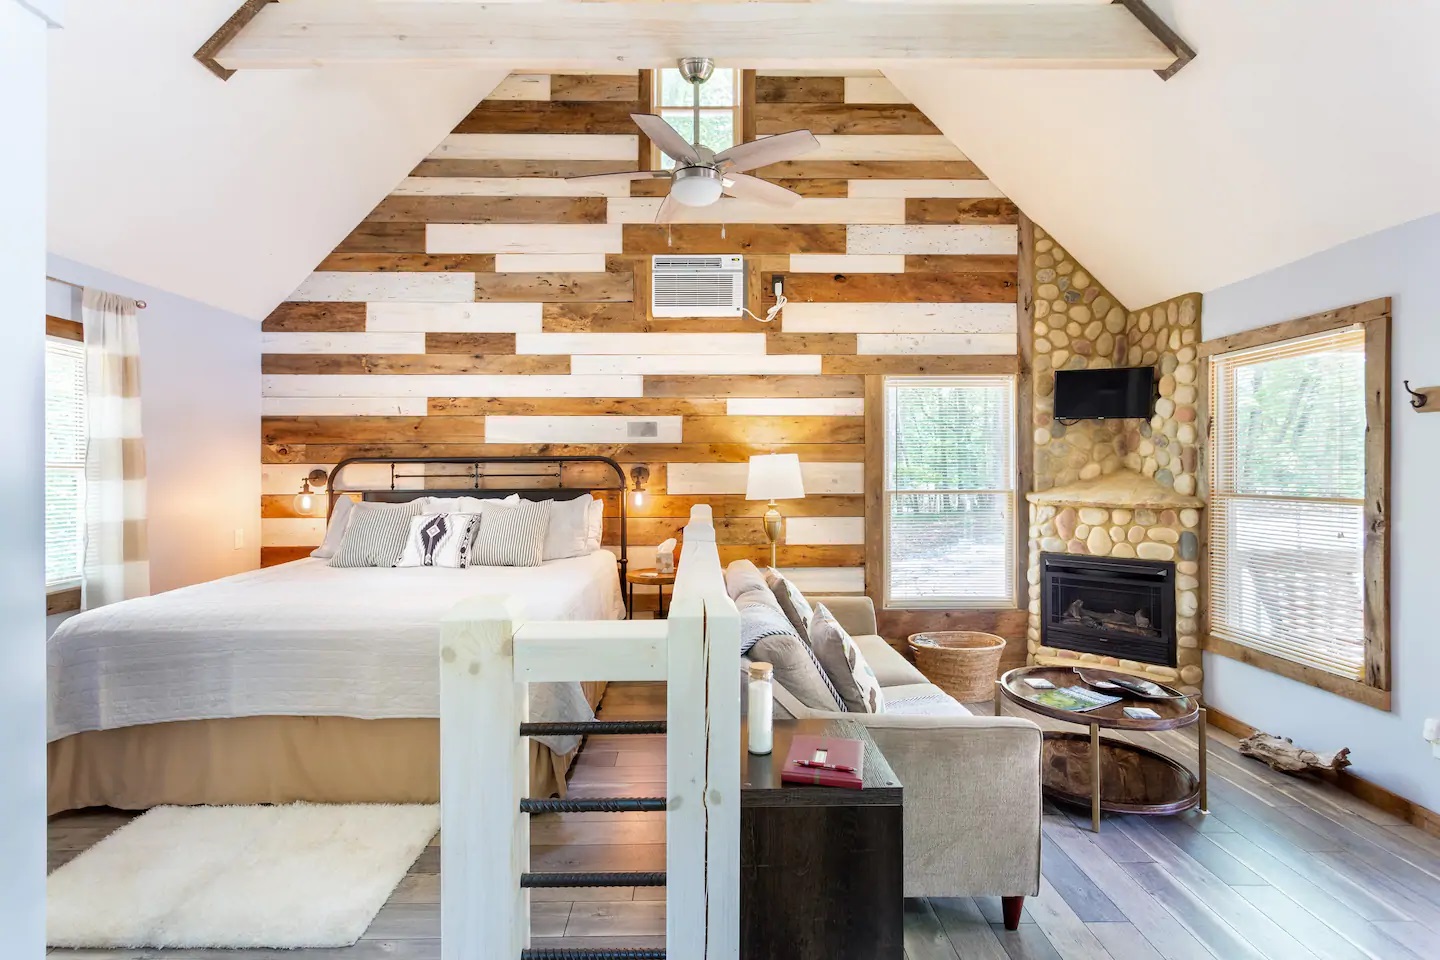 Charming And Secluded Tiny Home In Blue Ridge Georgia United States BedroomView